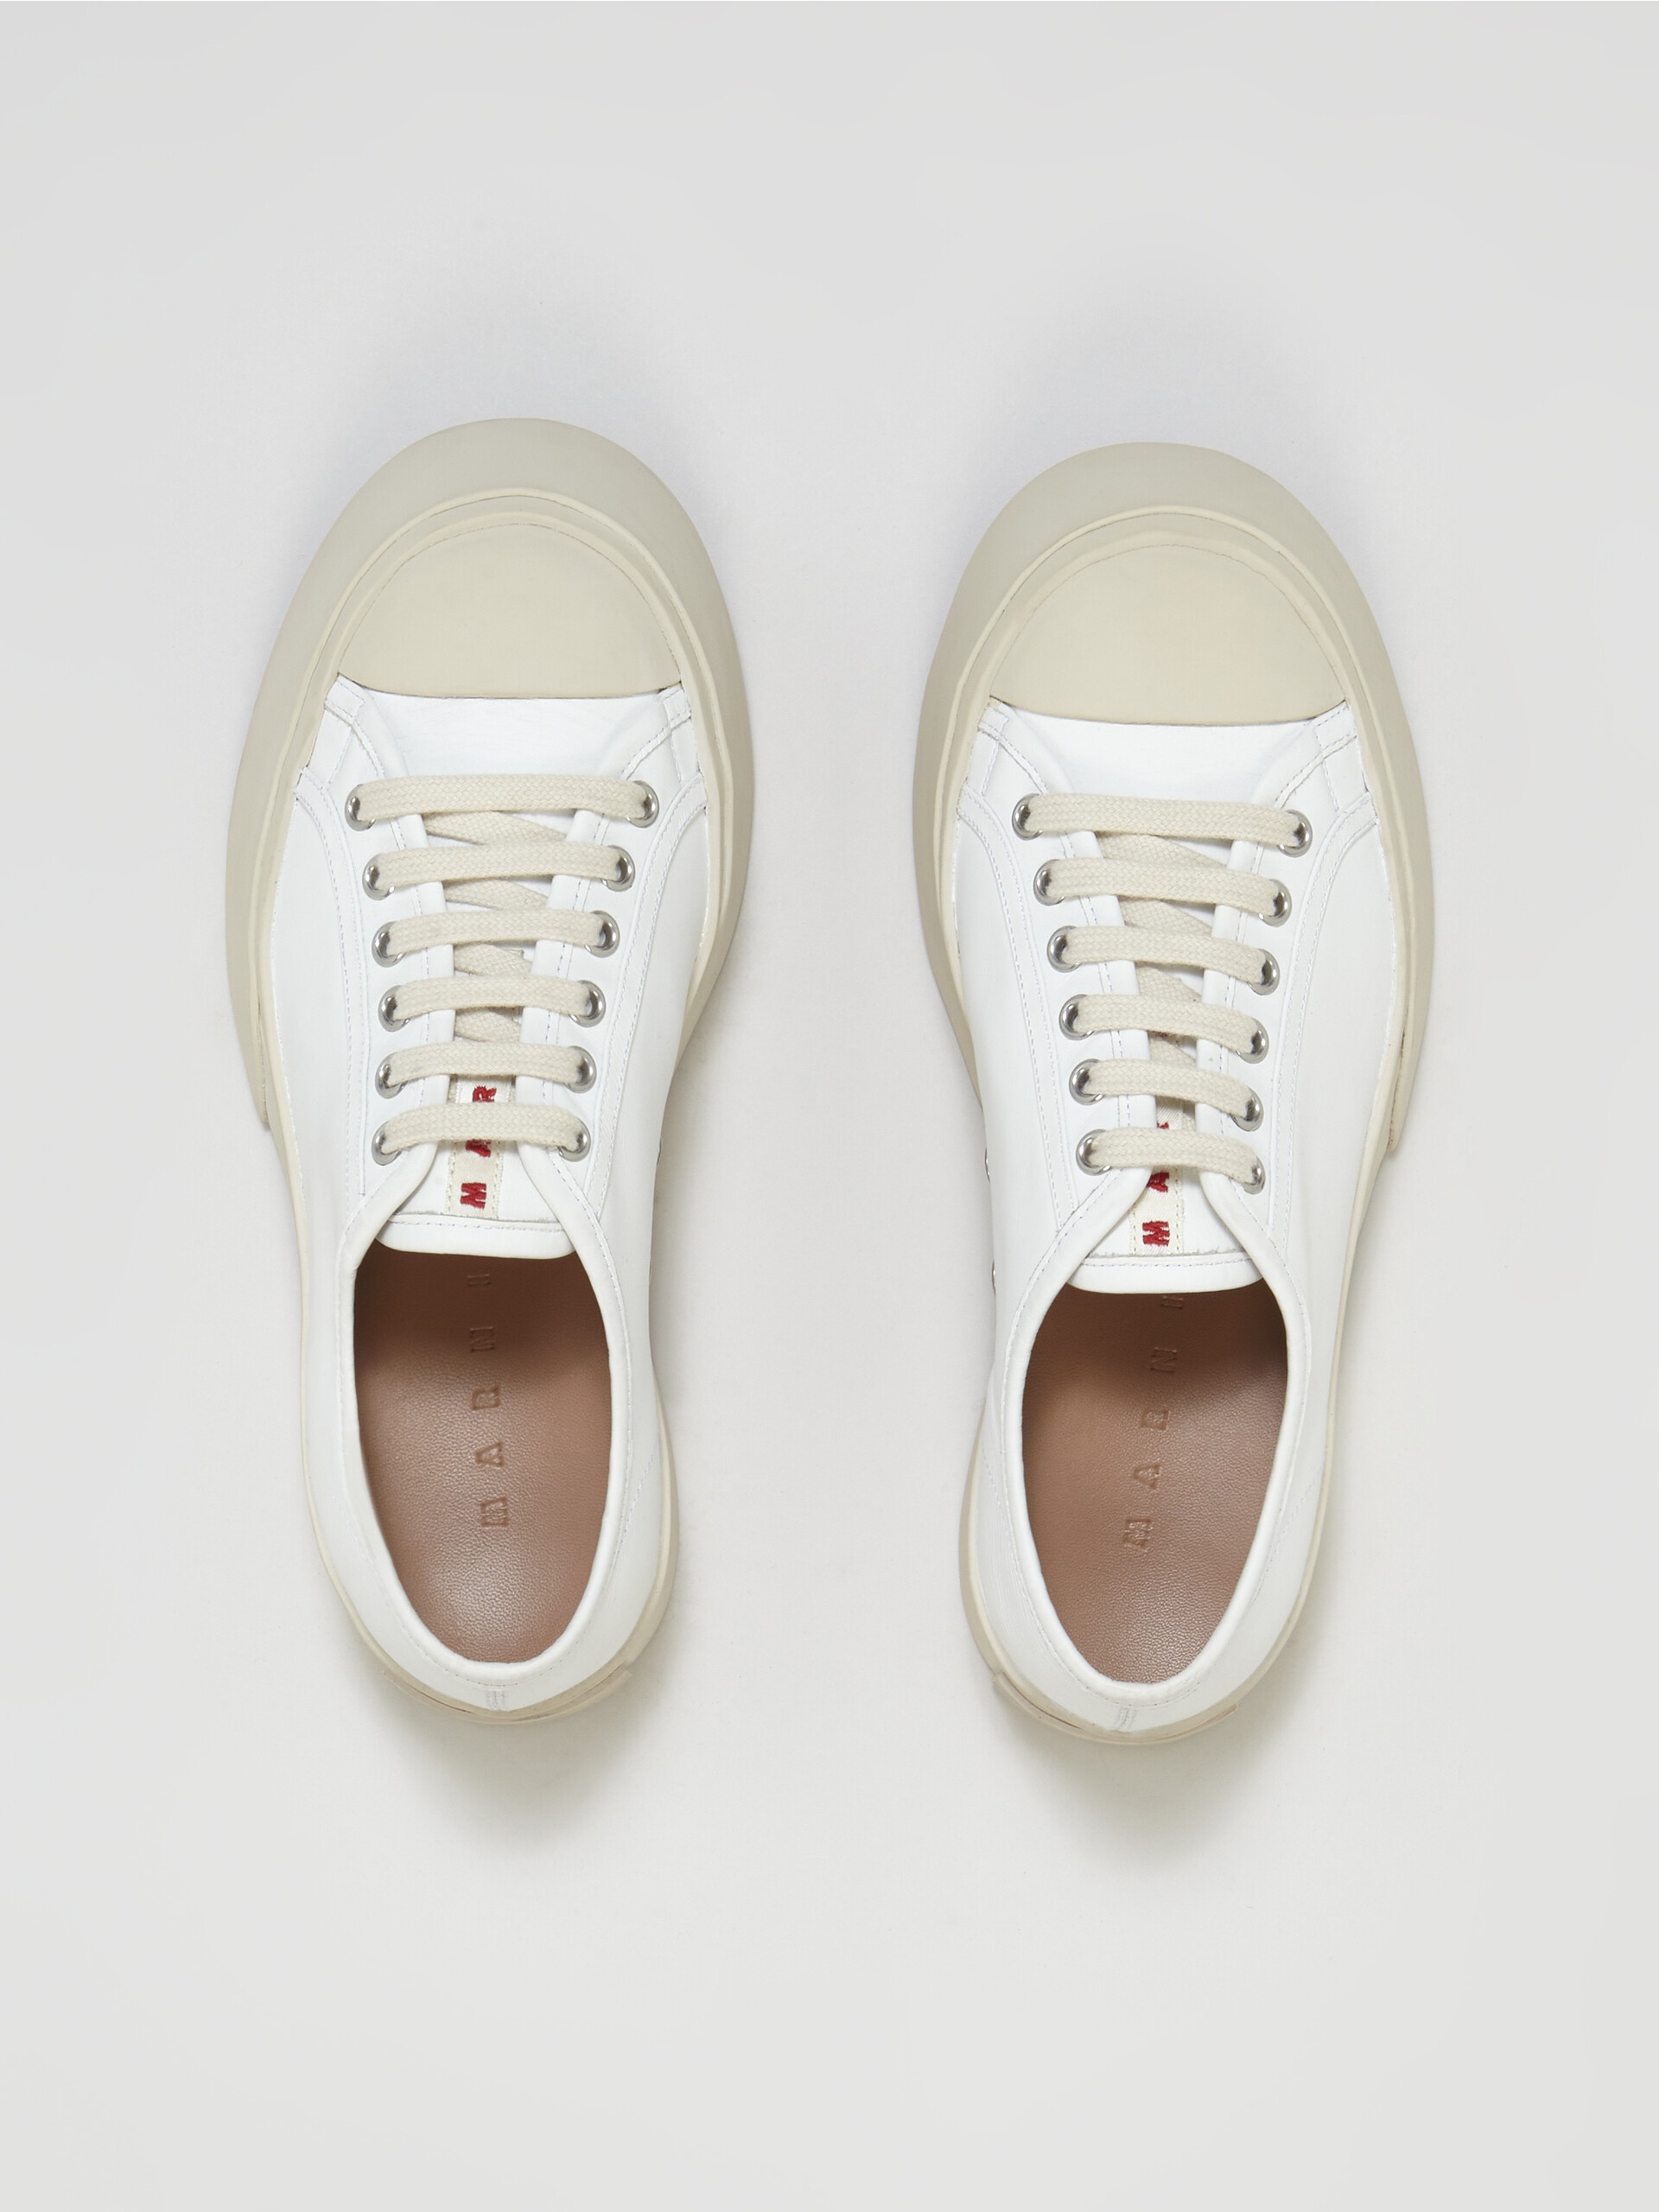 WHITE NAPPA LEATHER PABLO LACE-UP SNEAKER - 4